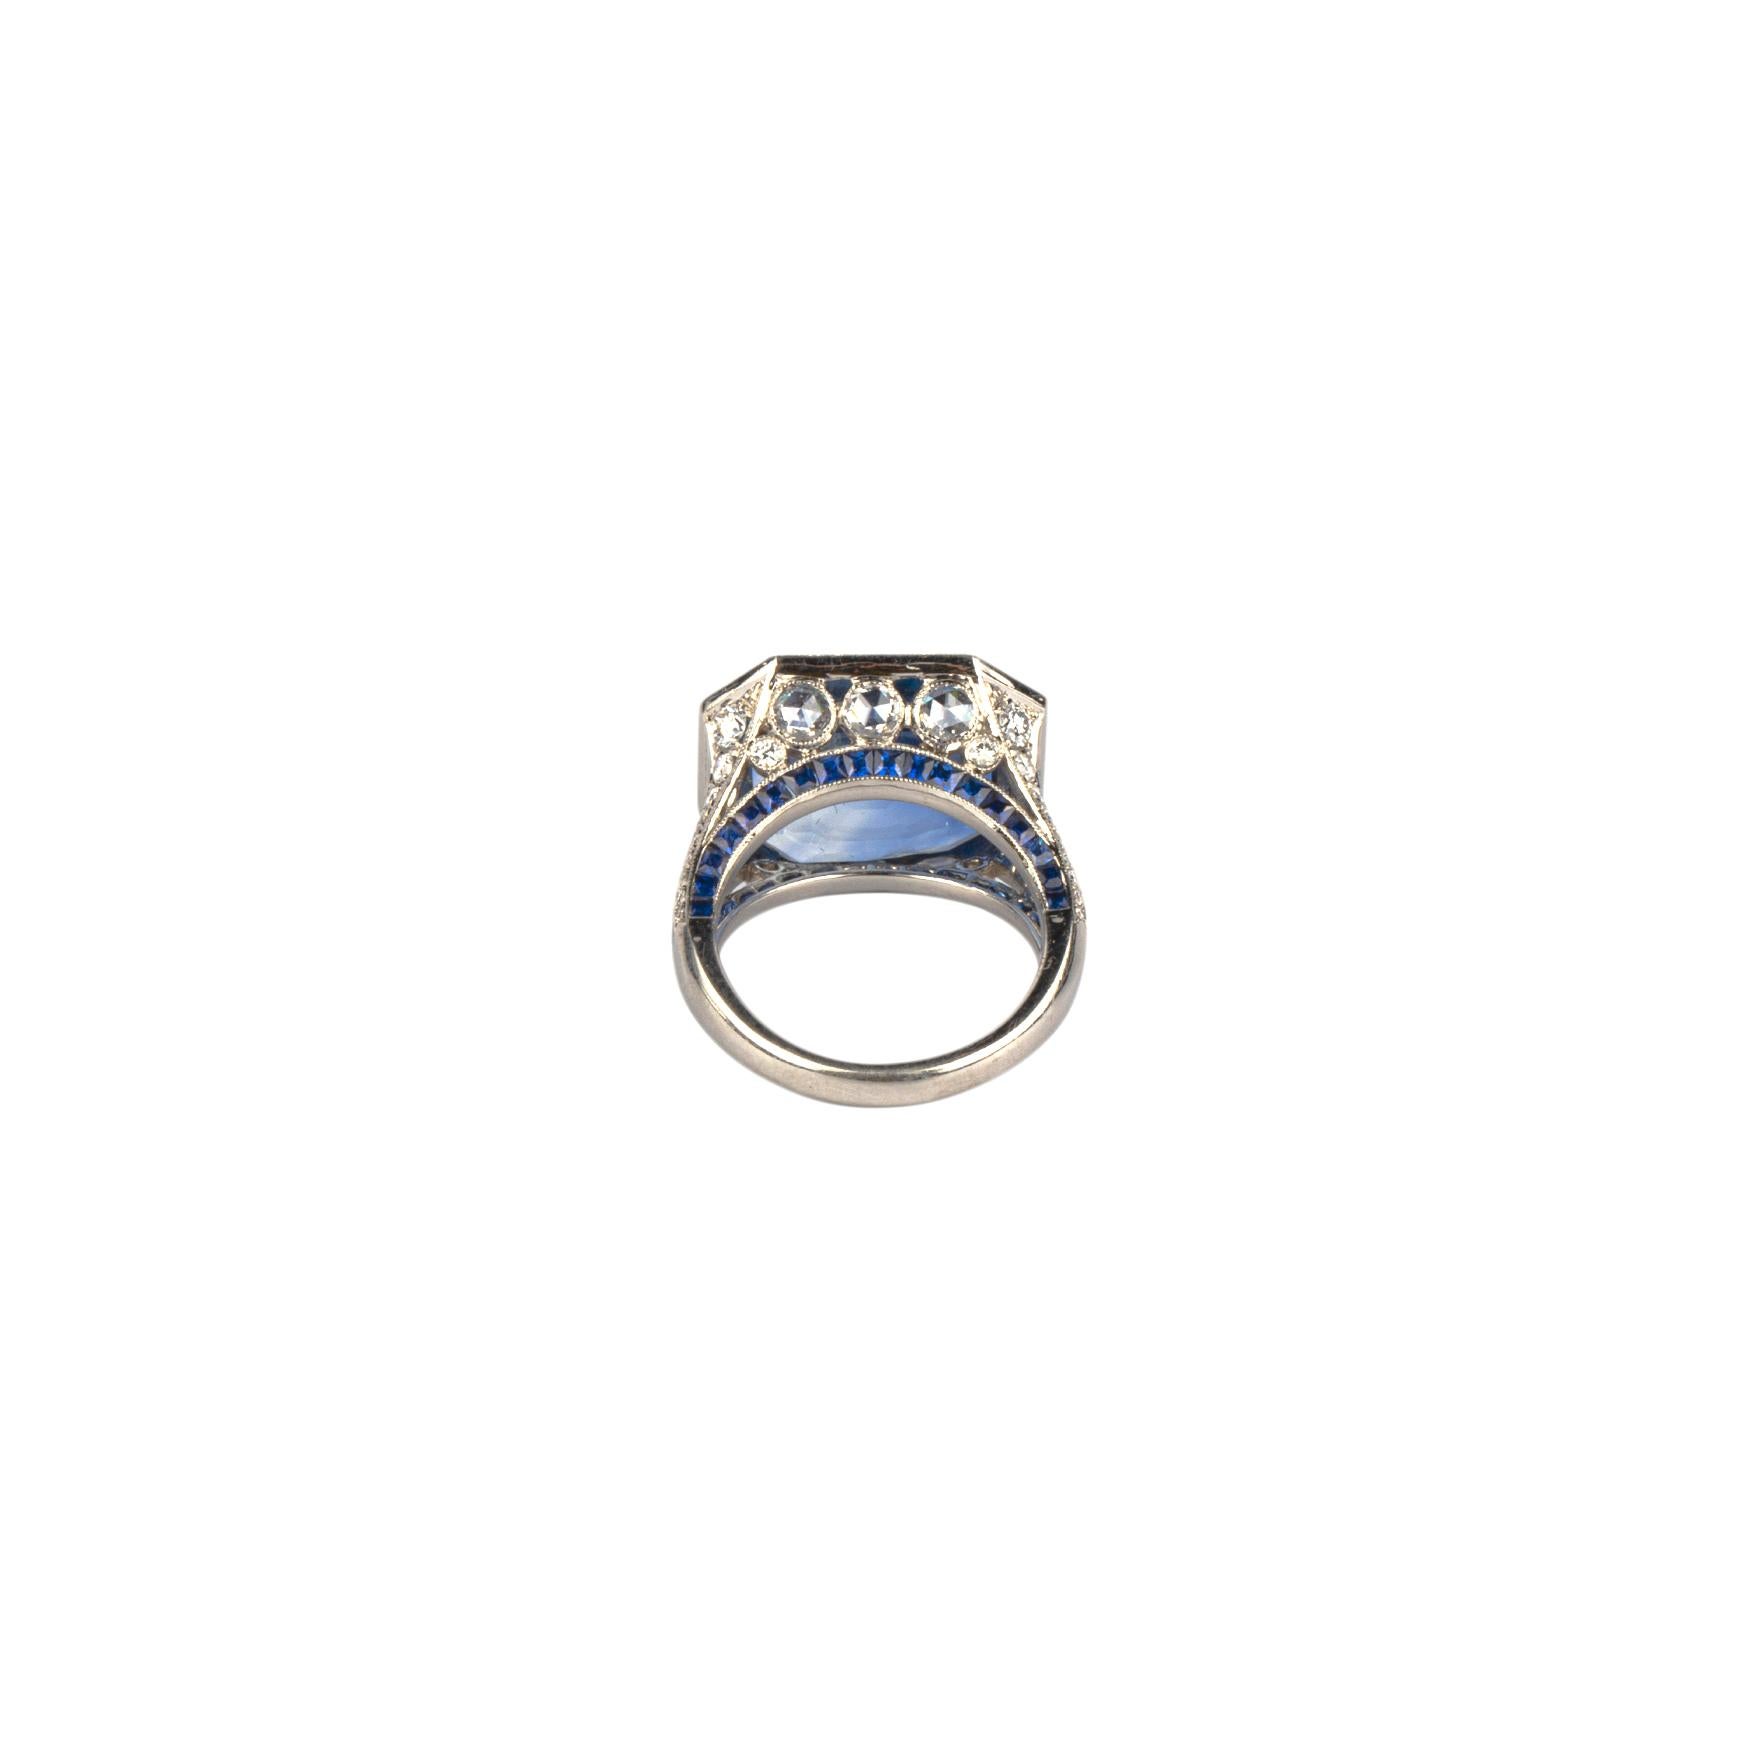 Important 15.53ct Burmese Sapphire and White Gold Ring In Excellent Condition For Sale In New York, NY